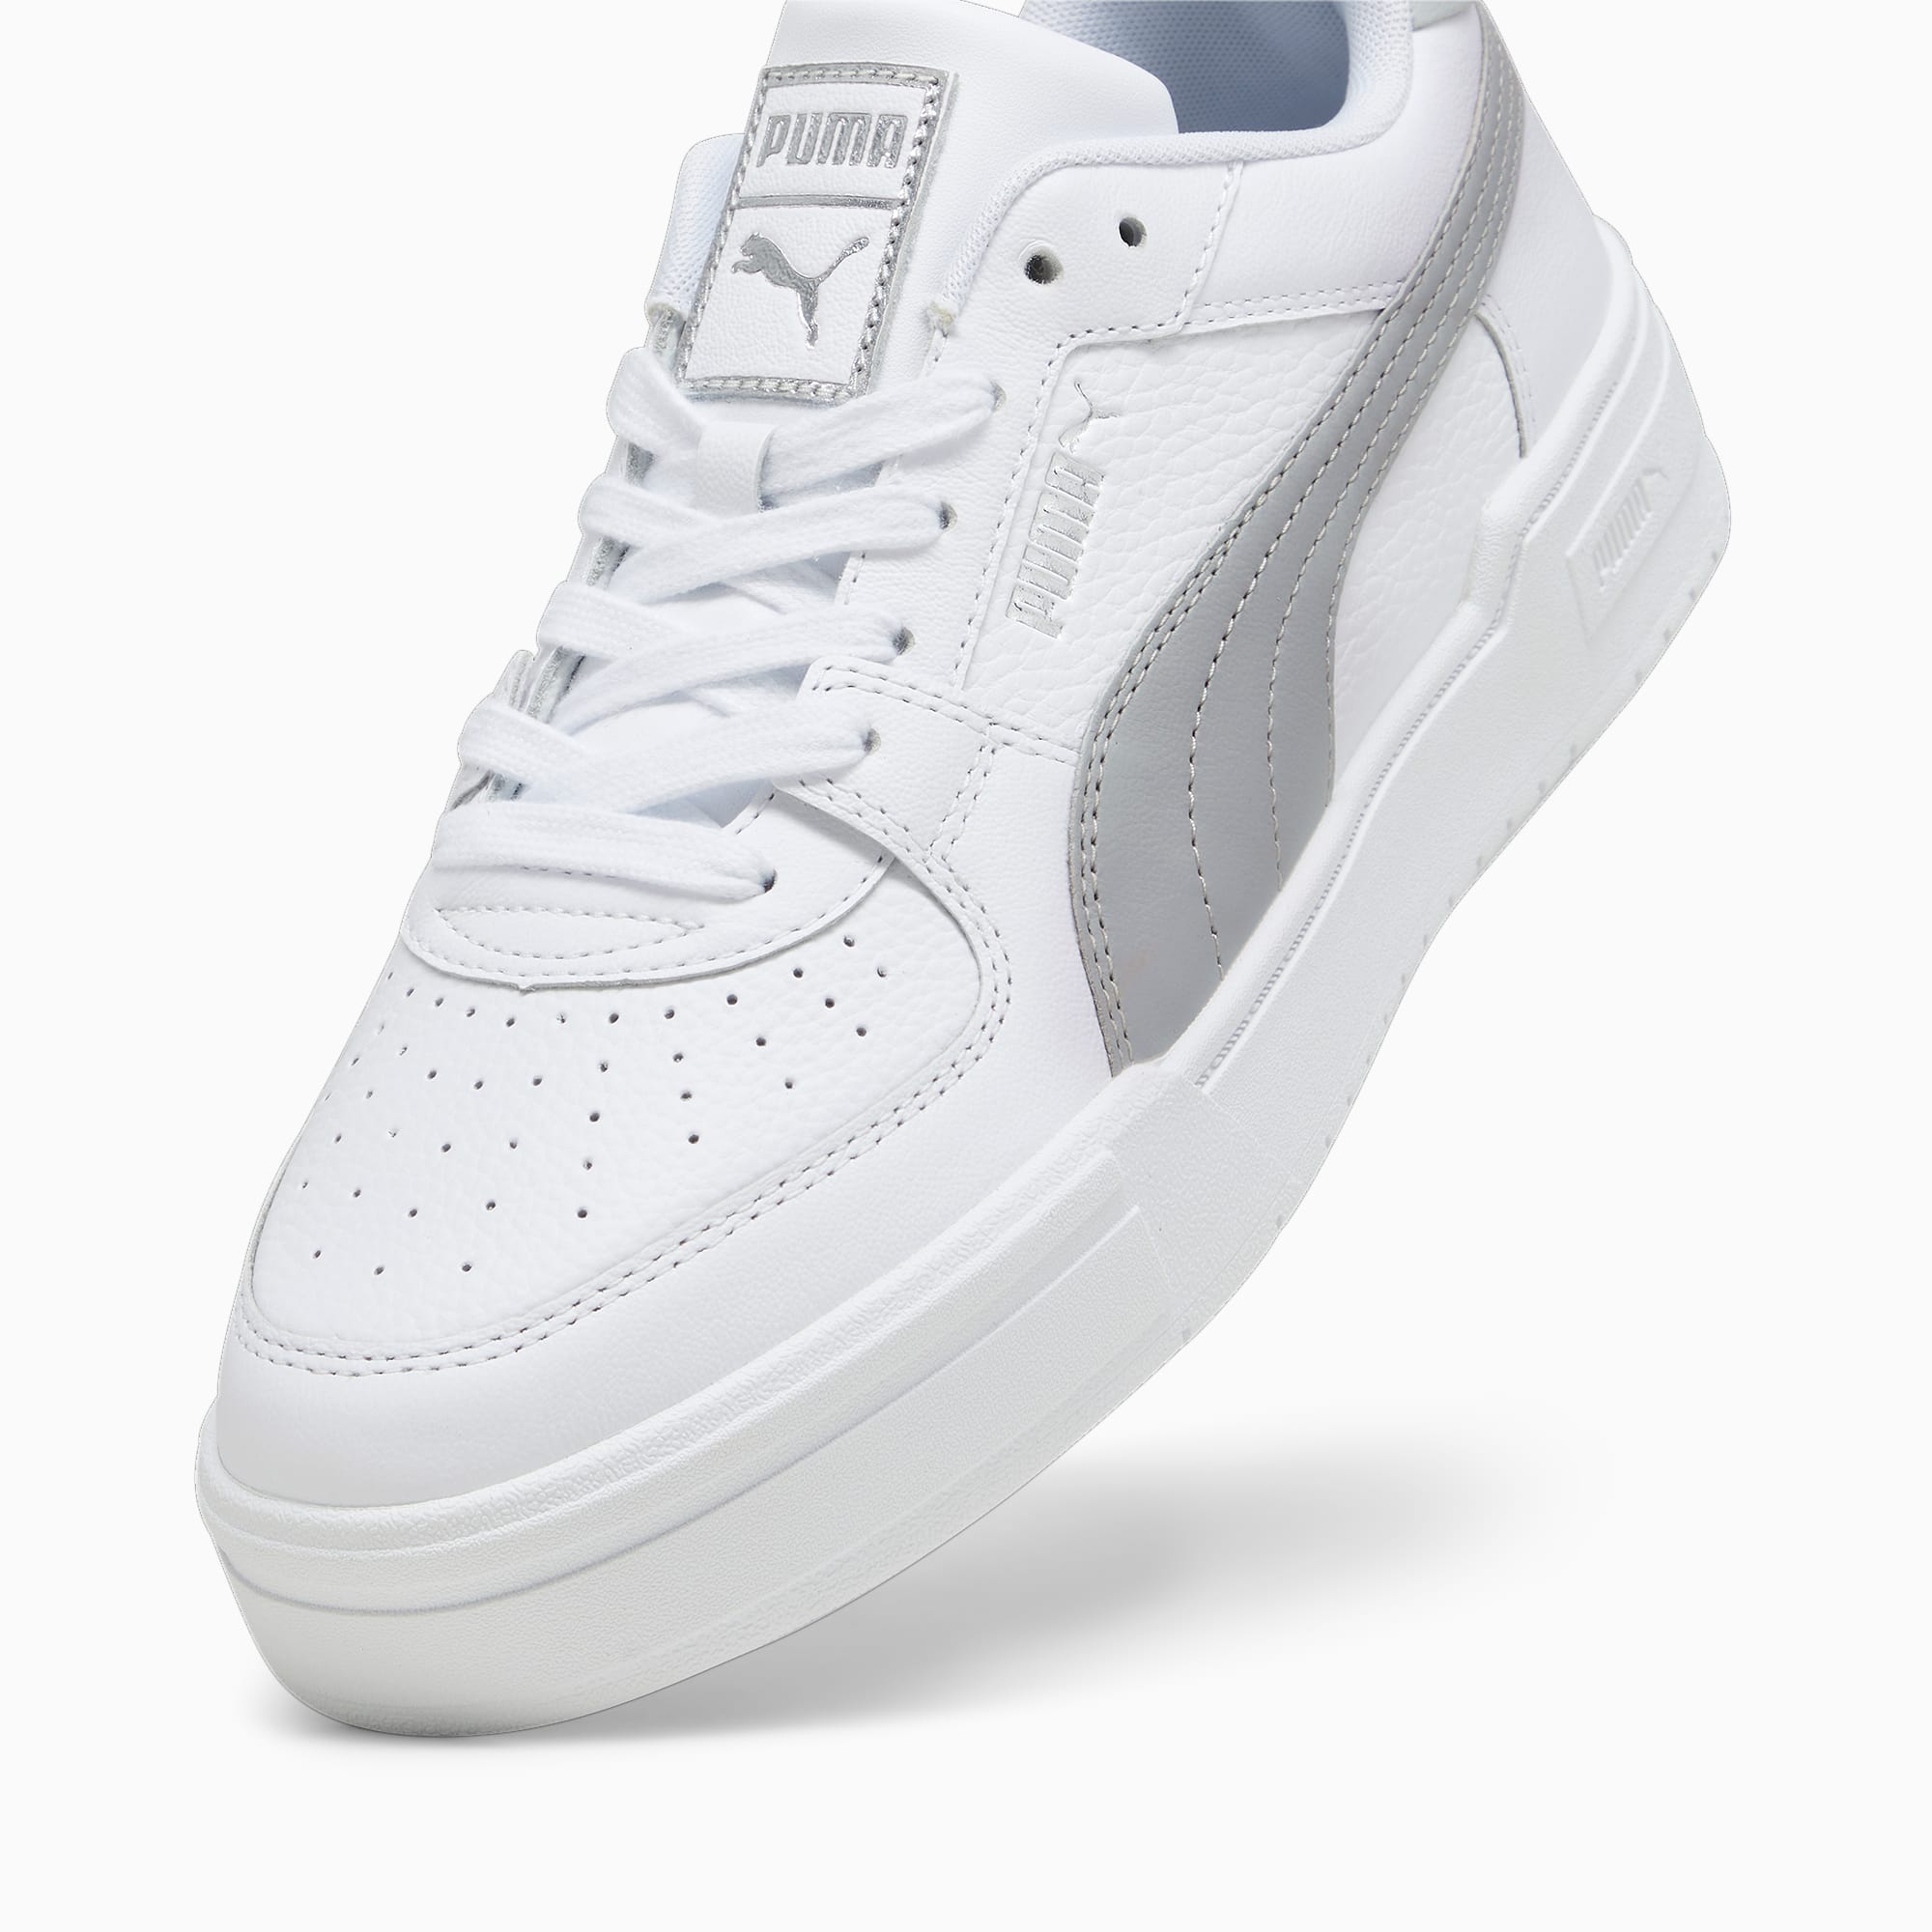 Women's PUMA Ca Pro Classic Trainers, White/Cool Light Grey, Size 38, Shoes